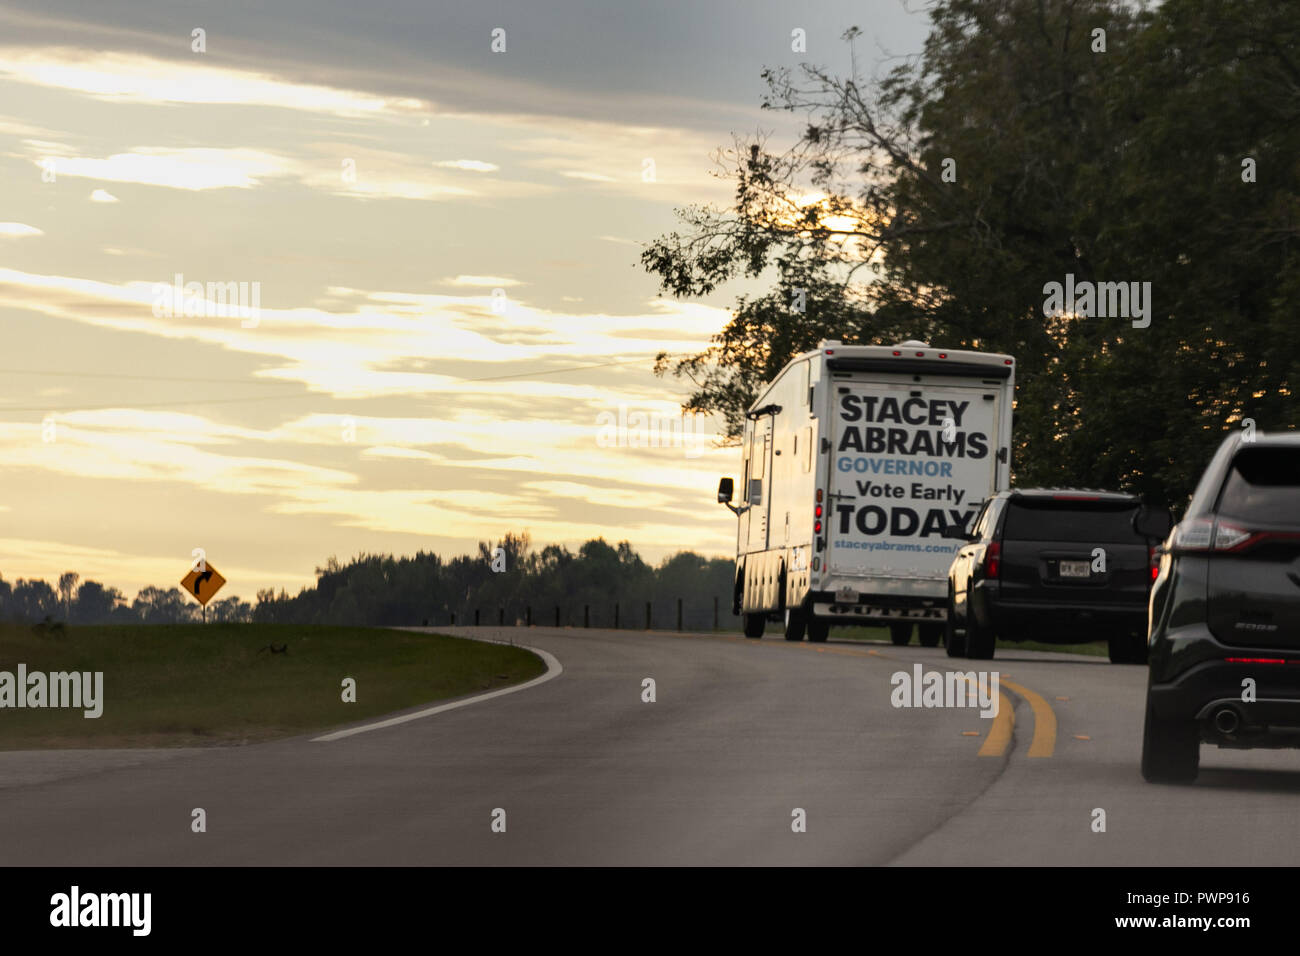 Thompson, Georgia, USA. 17th Oct 2018. Stacey Abrams bus travels through rural Georgia on October 17th. She is traveling the state encourages folks to vote early. Credit: Cindy Brown/Alamy Live News Stock Photo